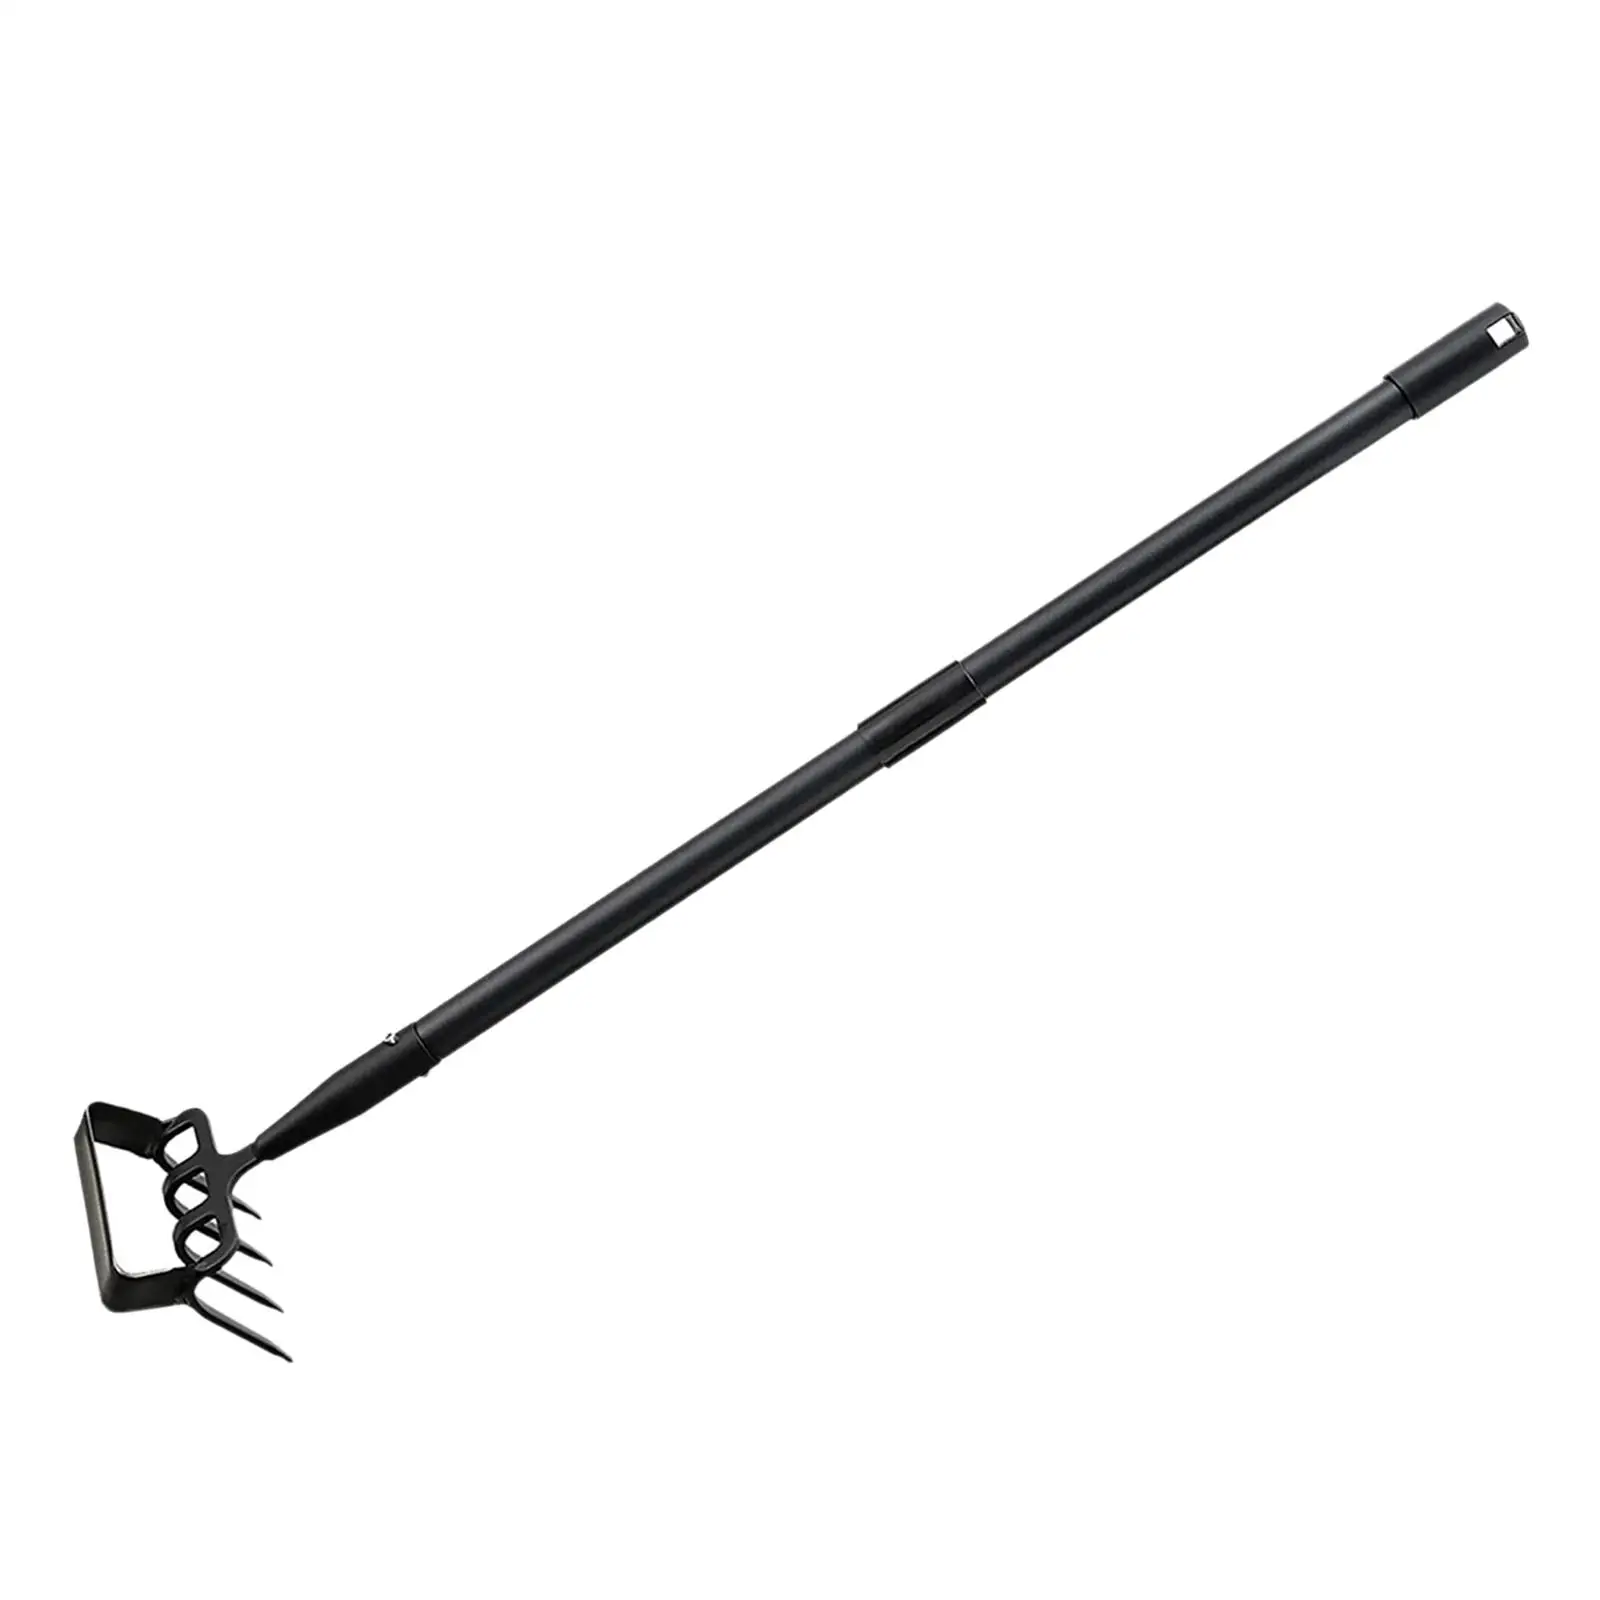 Stirrup Hoe and Cultivator Portable Dual Purpose Long Handle Garden Tool for Planting Loosening Digging Cultivating Women Men